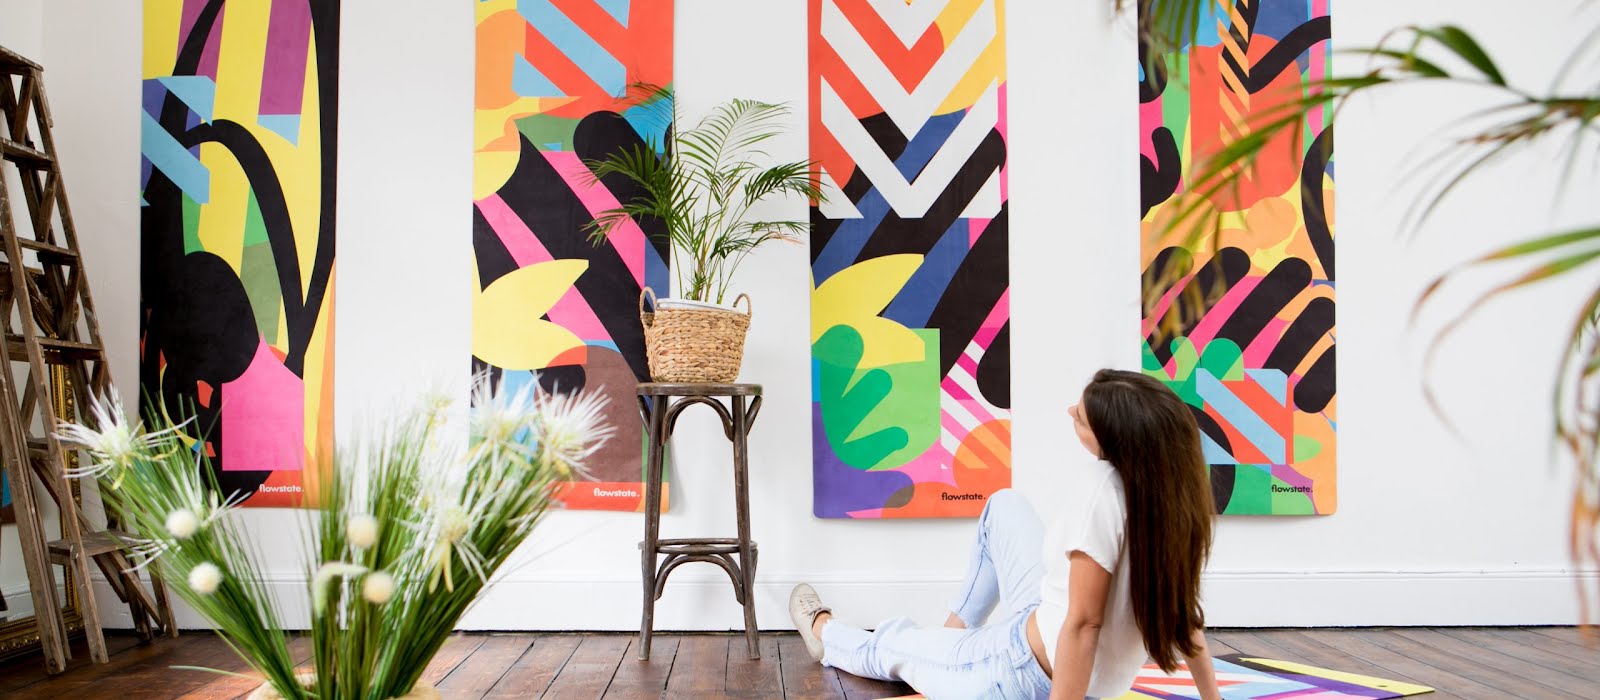 These sustainable yoga mats are so beautiful they double as wall art